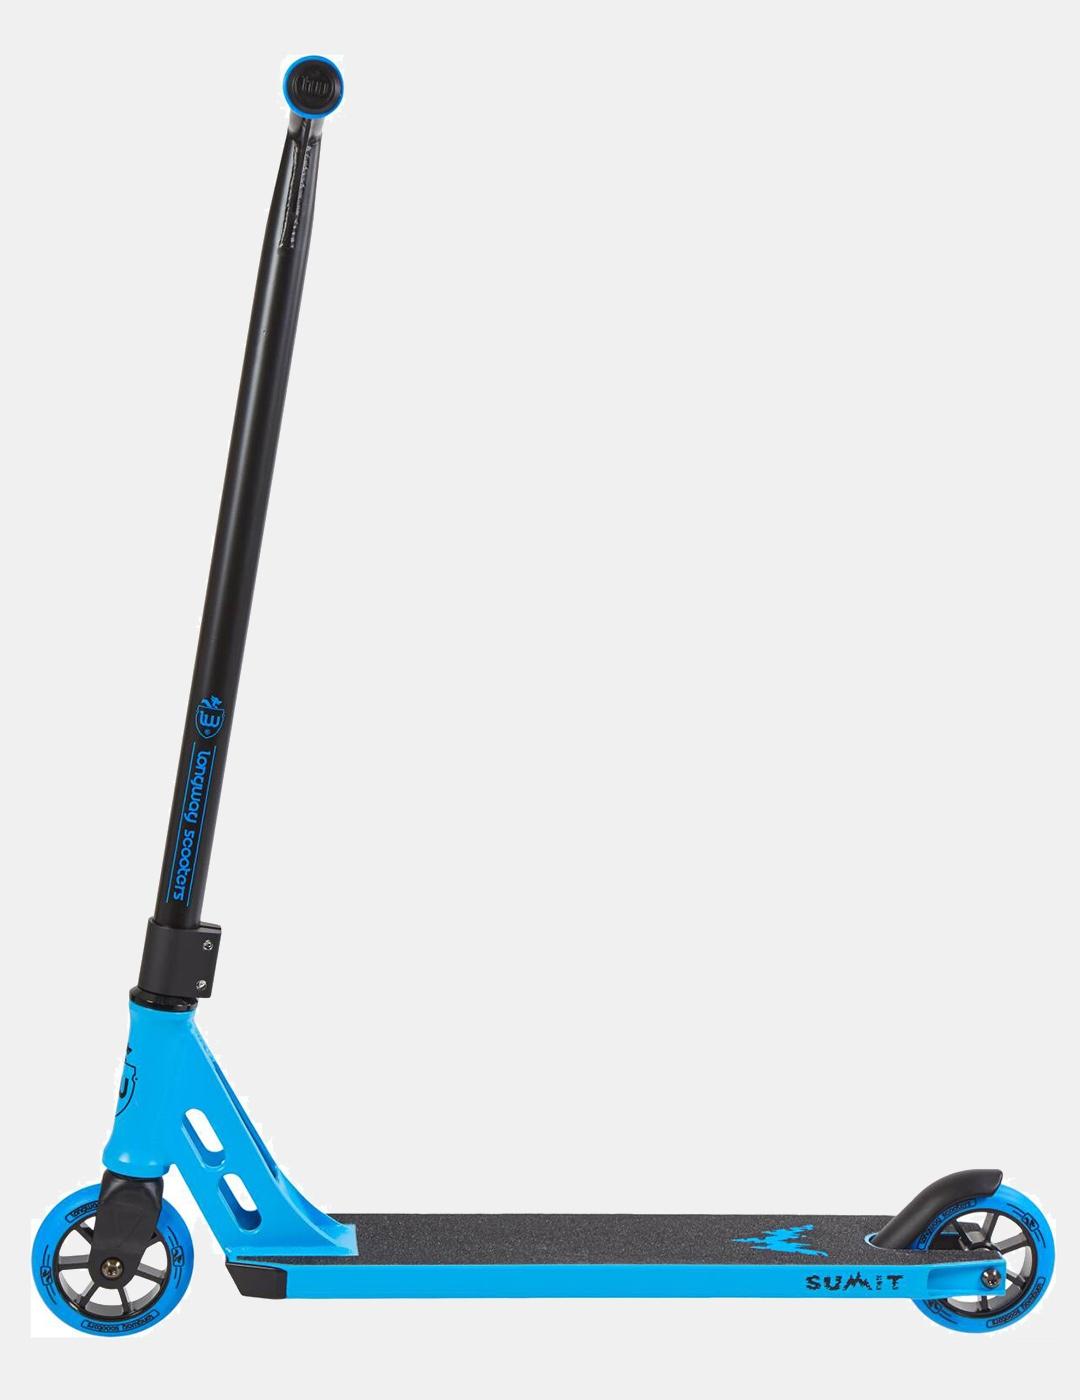 Scooter Completo LONGWAY SUMMIT - Azul